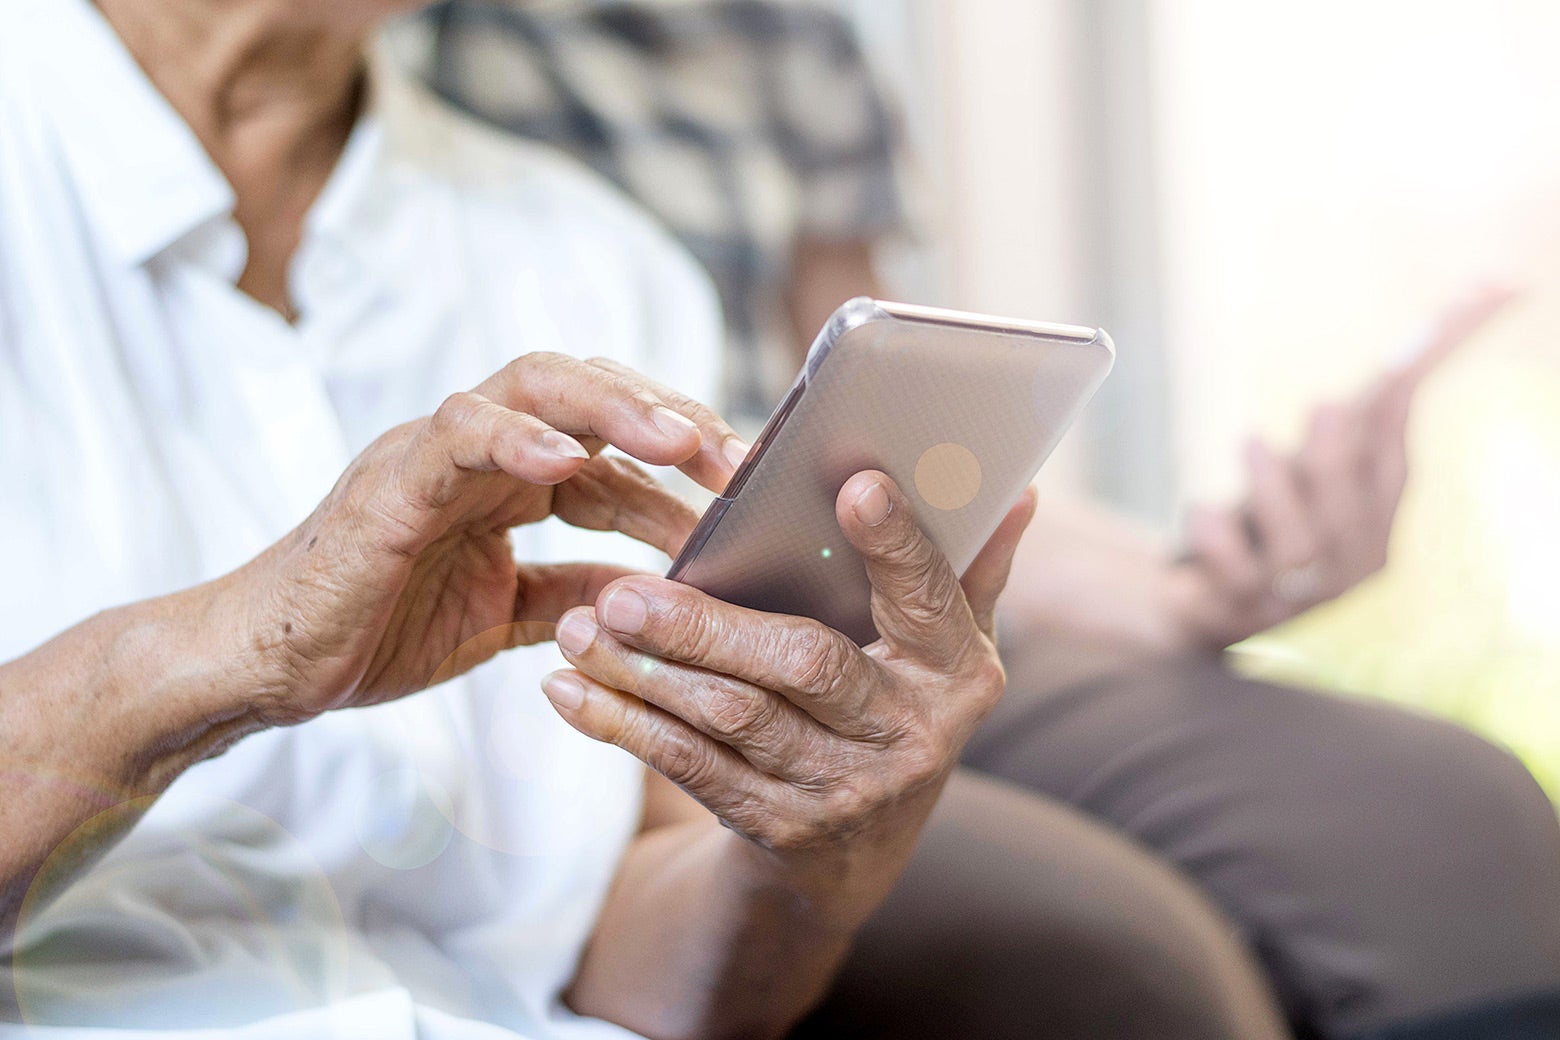 An elderly person's hands hold a smartphone